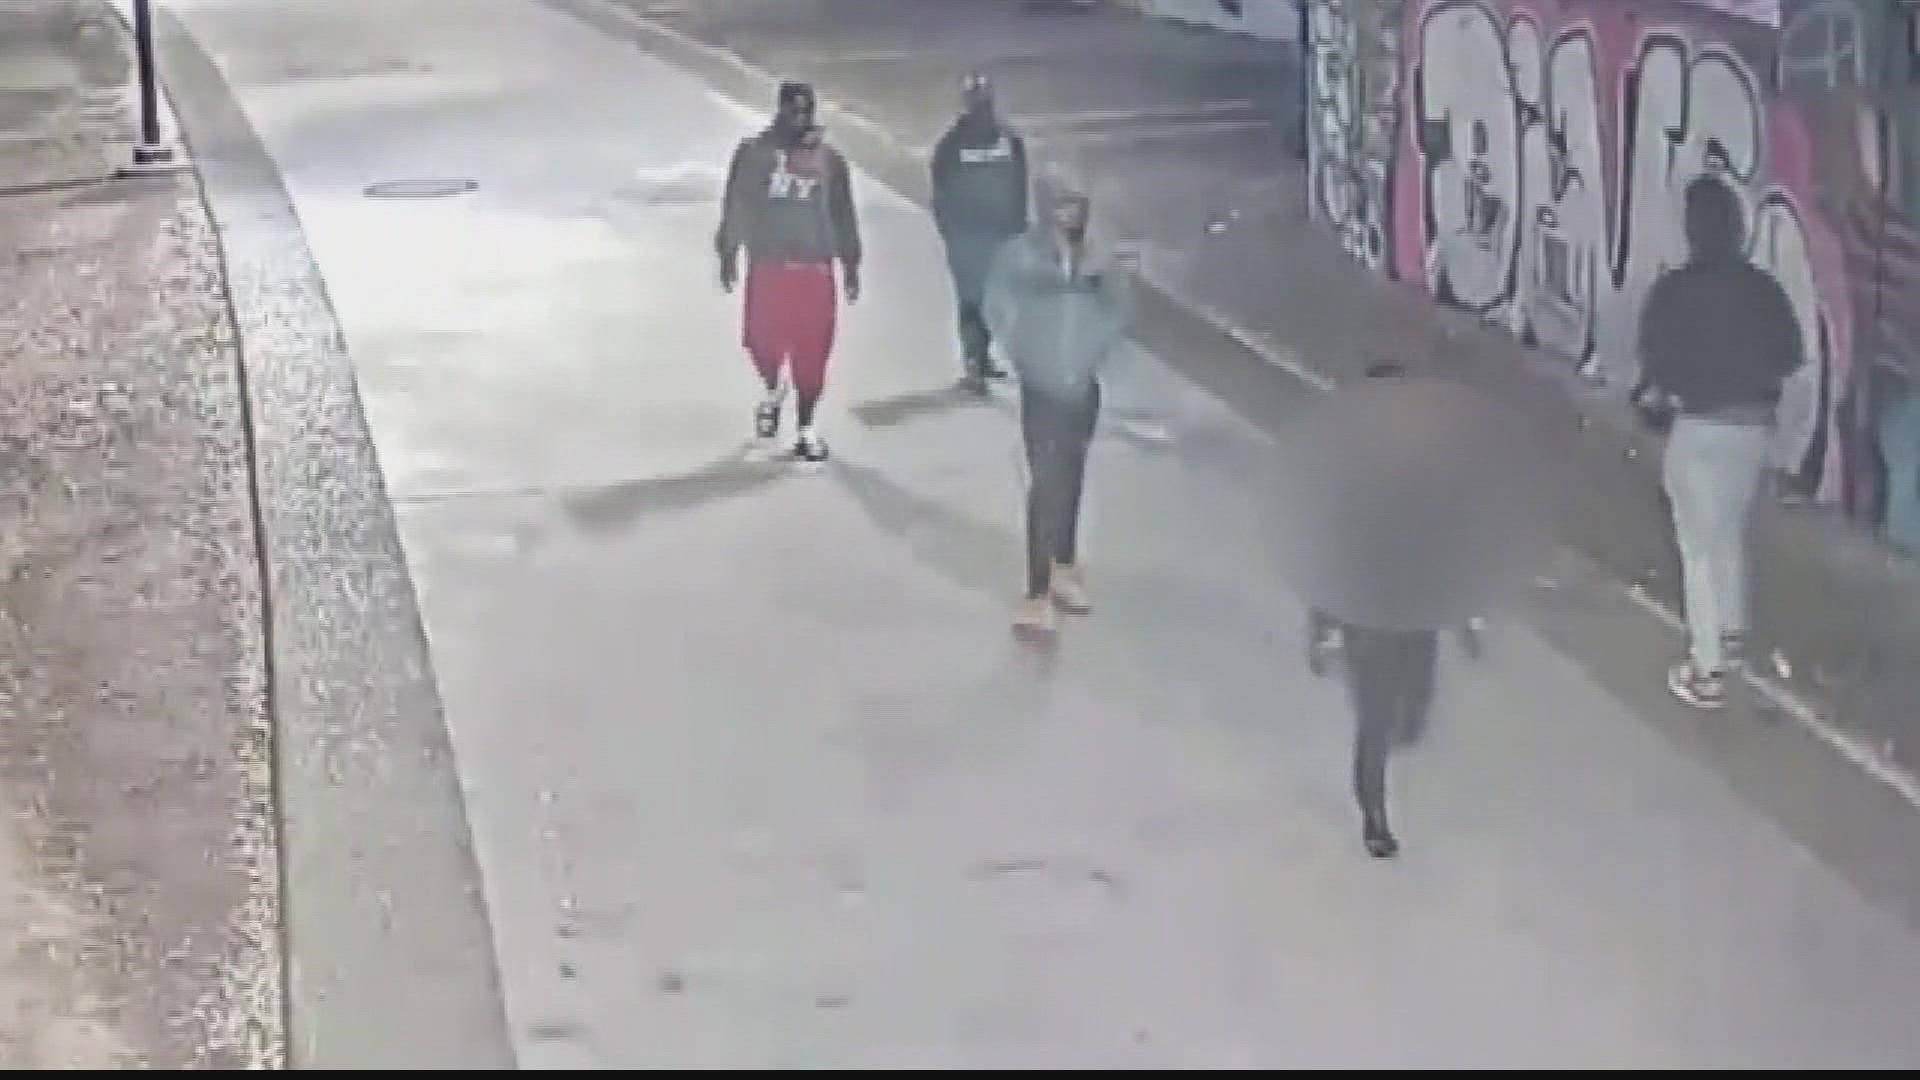 Investigators released new surveillance video from the night of Feb. 25, just hours before joggers found Thomas Arnold dead.